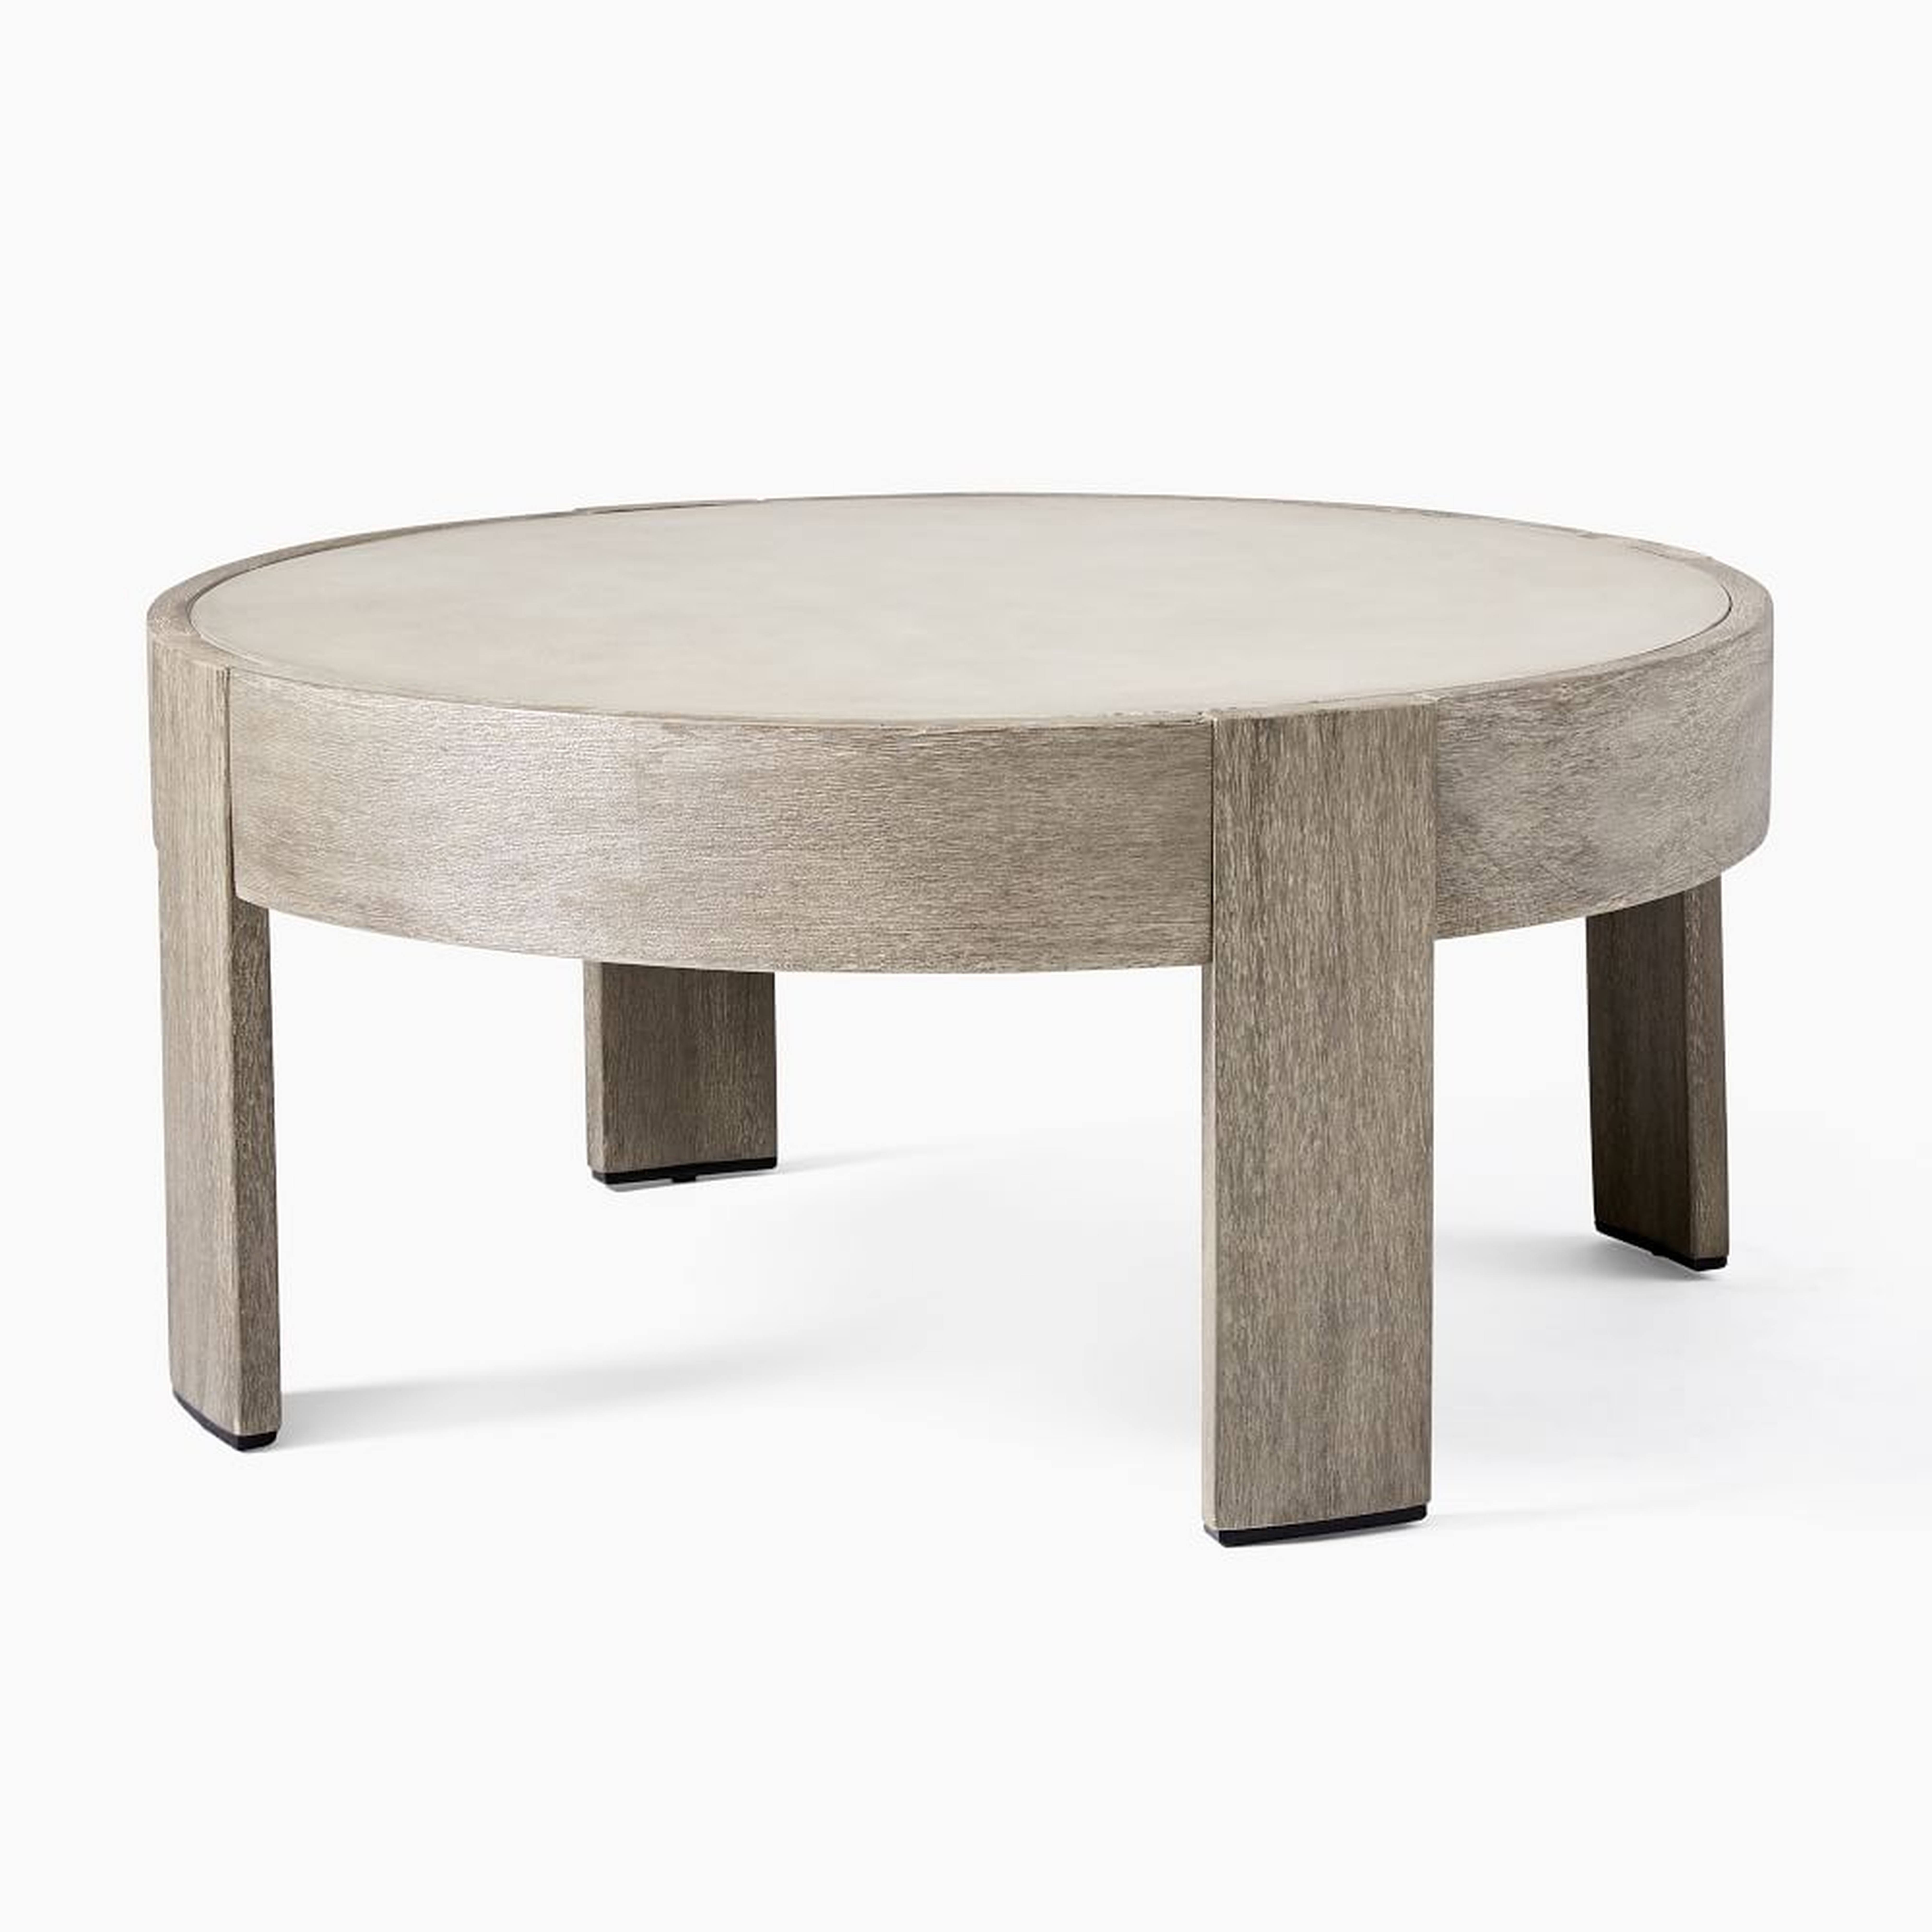 Portside Outdoor 34 in Round Coffee Table, Weathered Gray - West Elm